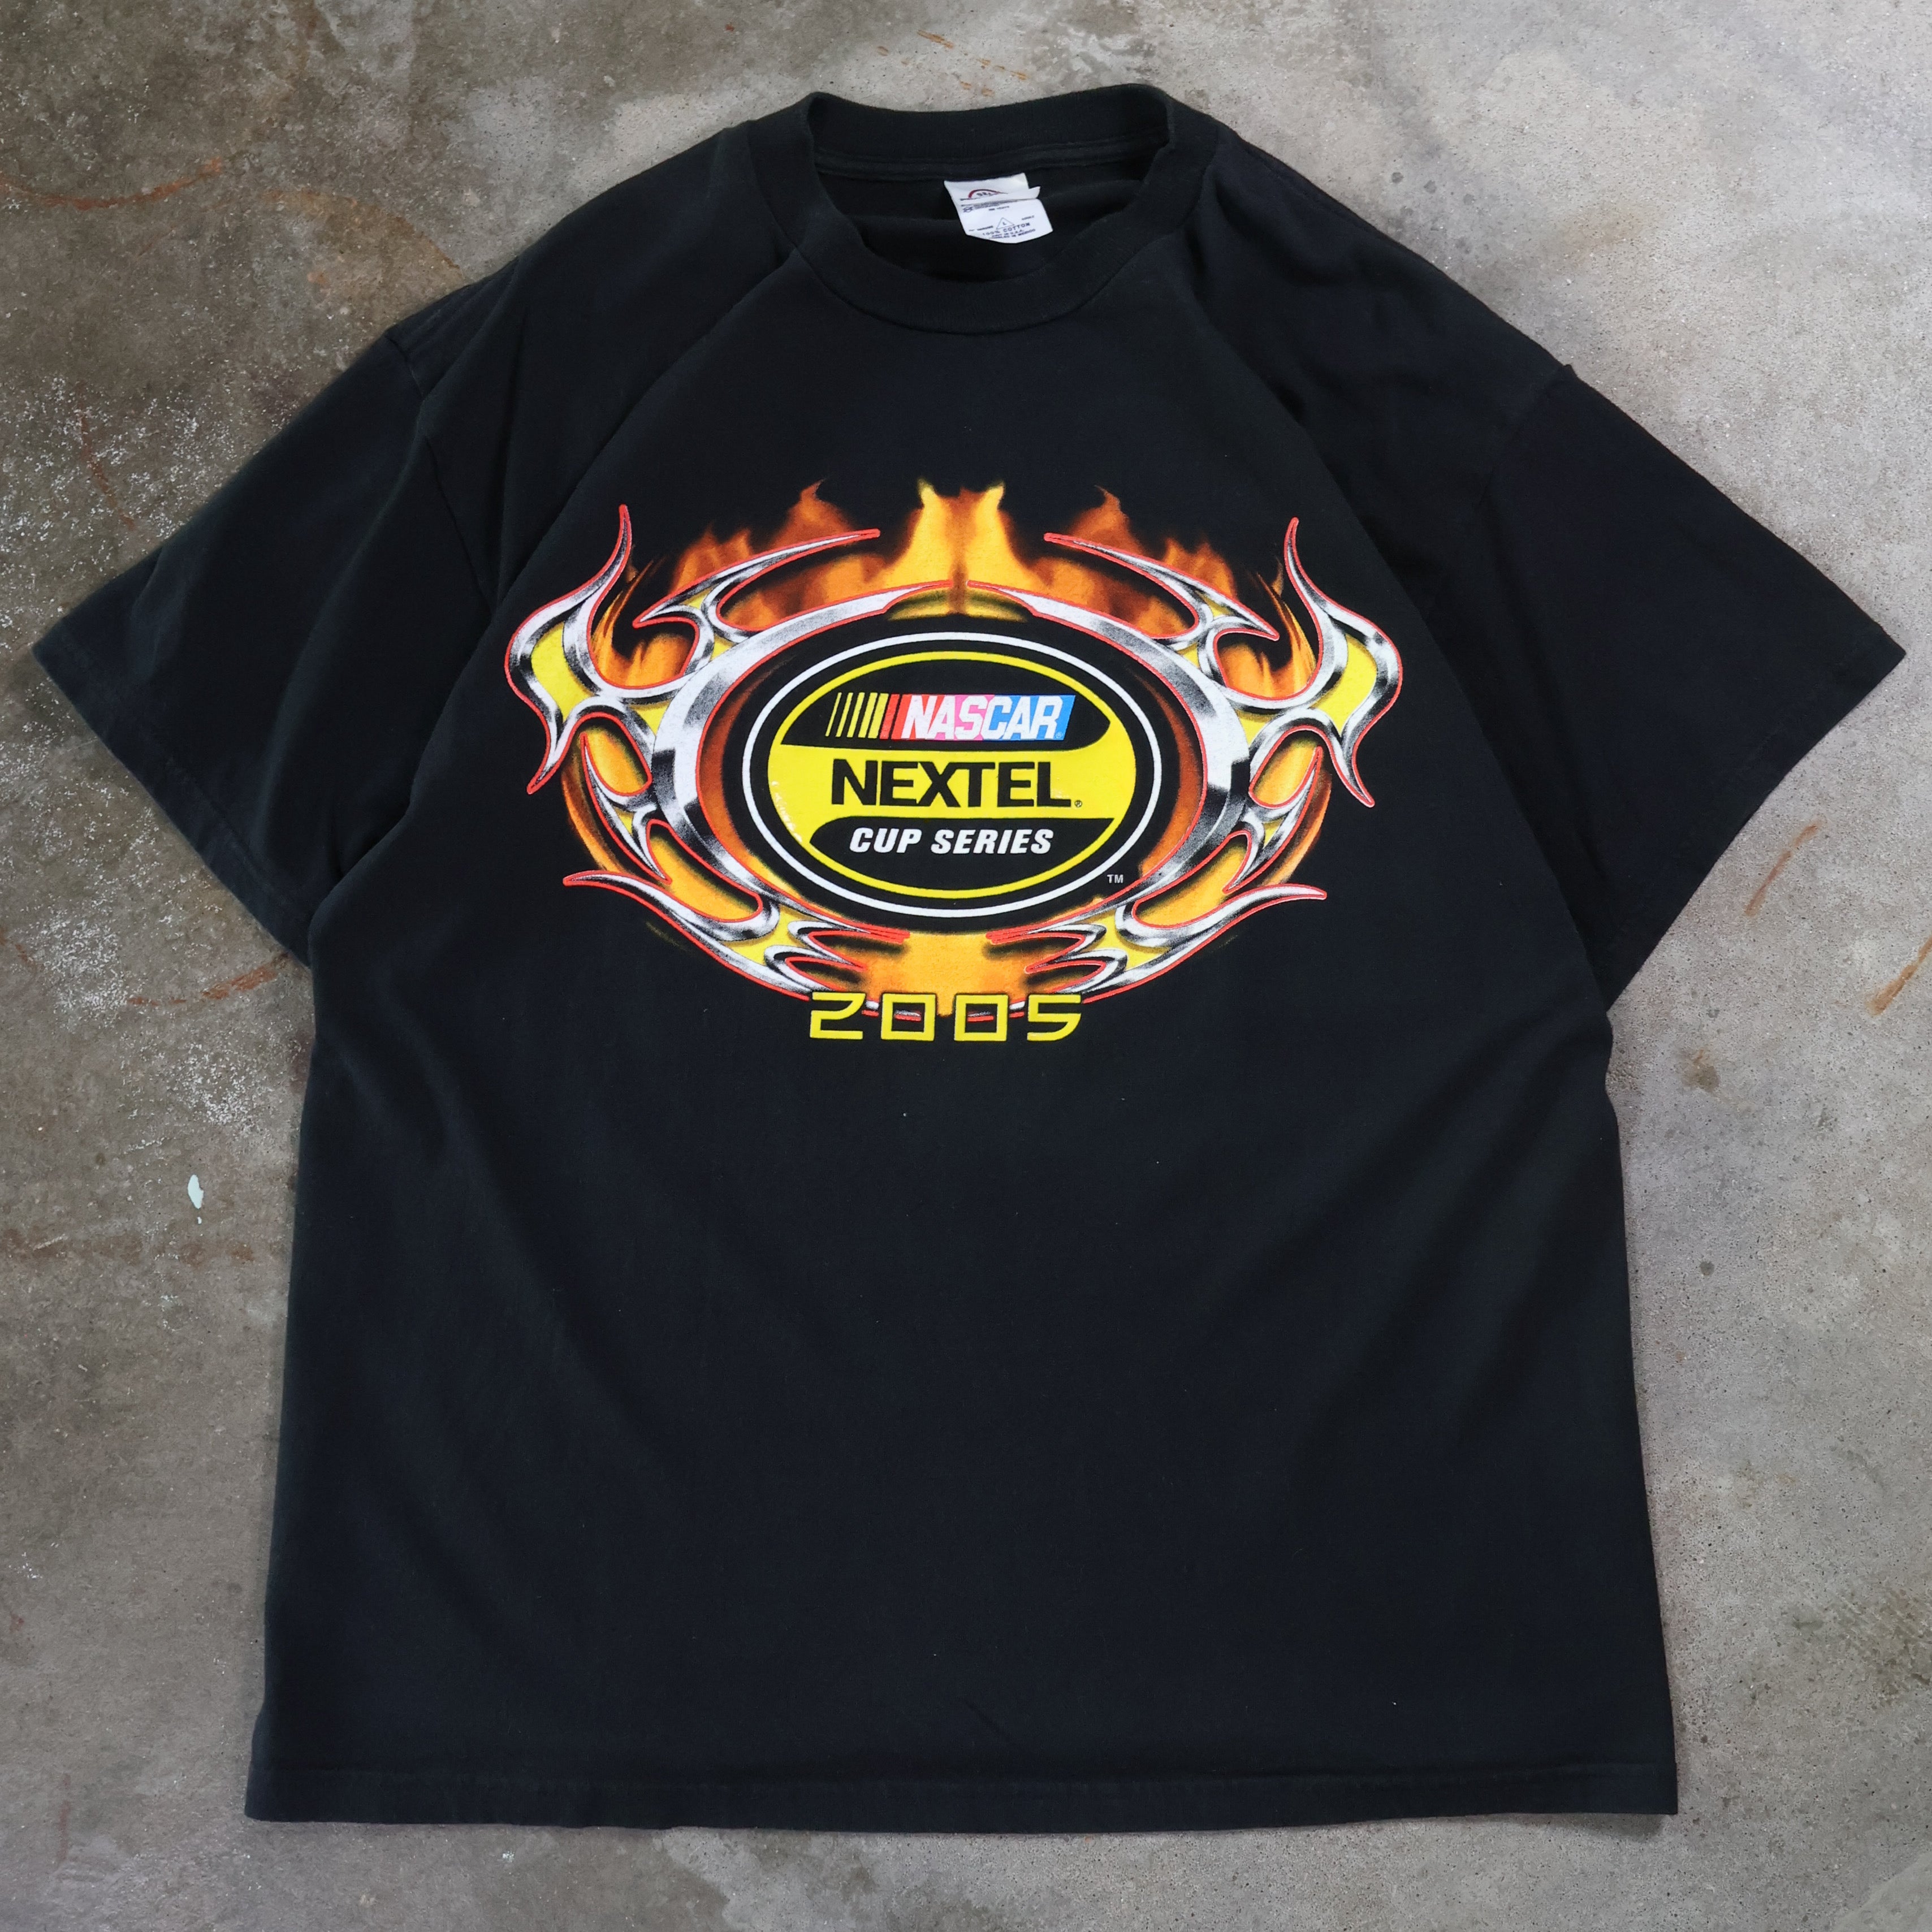 Nascar Cup Series Flame T-Shirt 2005 (Large)